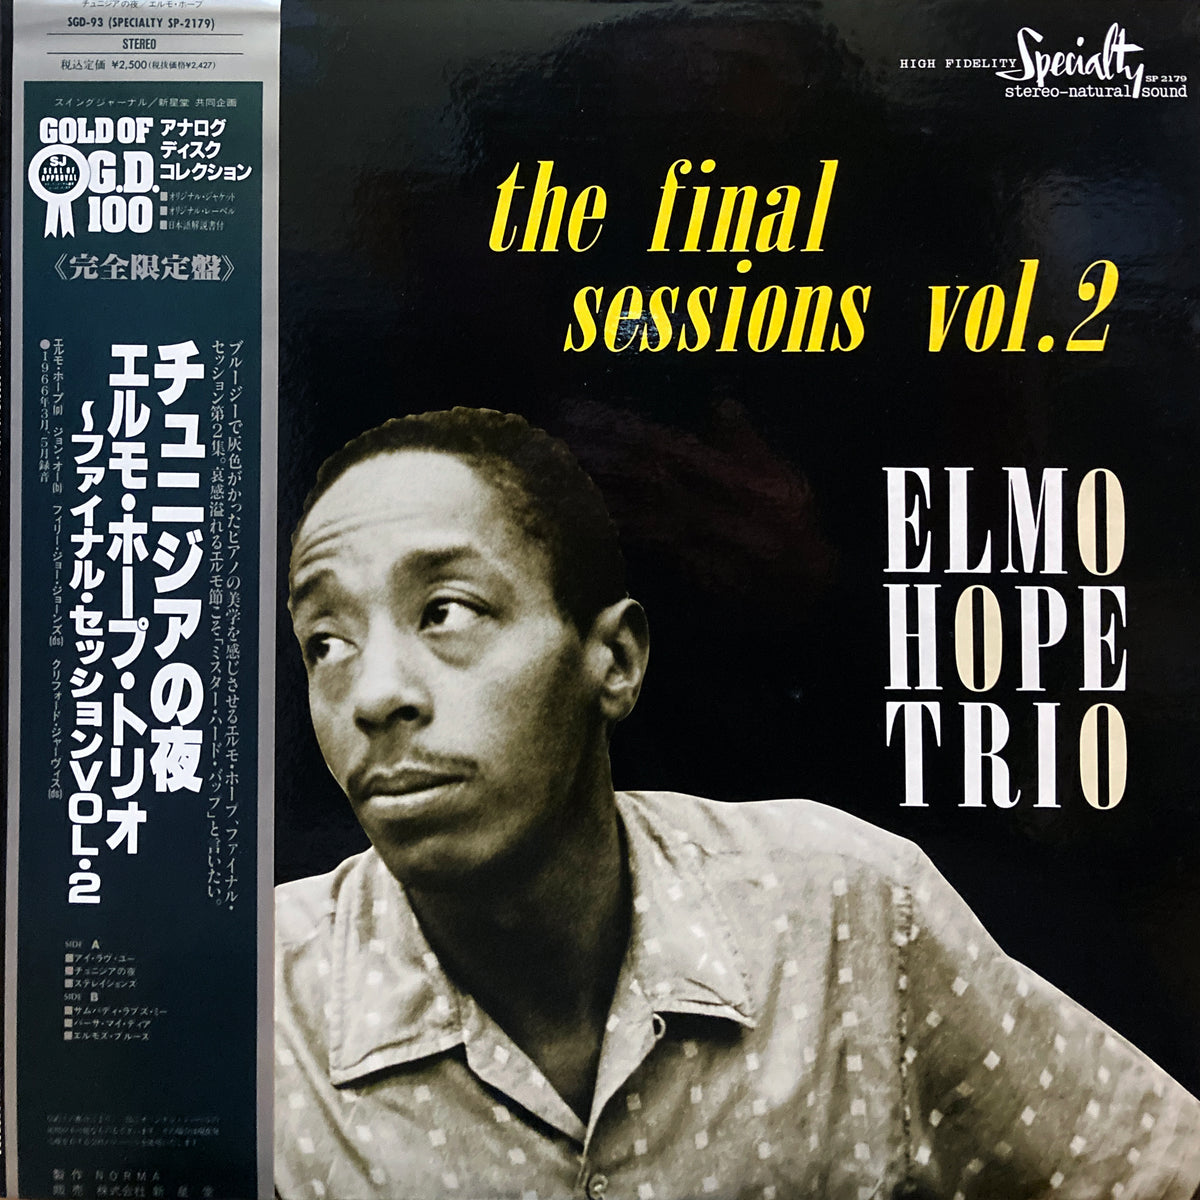 Elmo Hope Trio “The Final Sessions vol.2” – PHYSICAL STORE